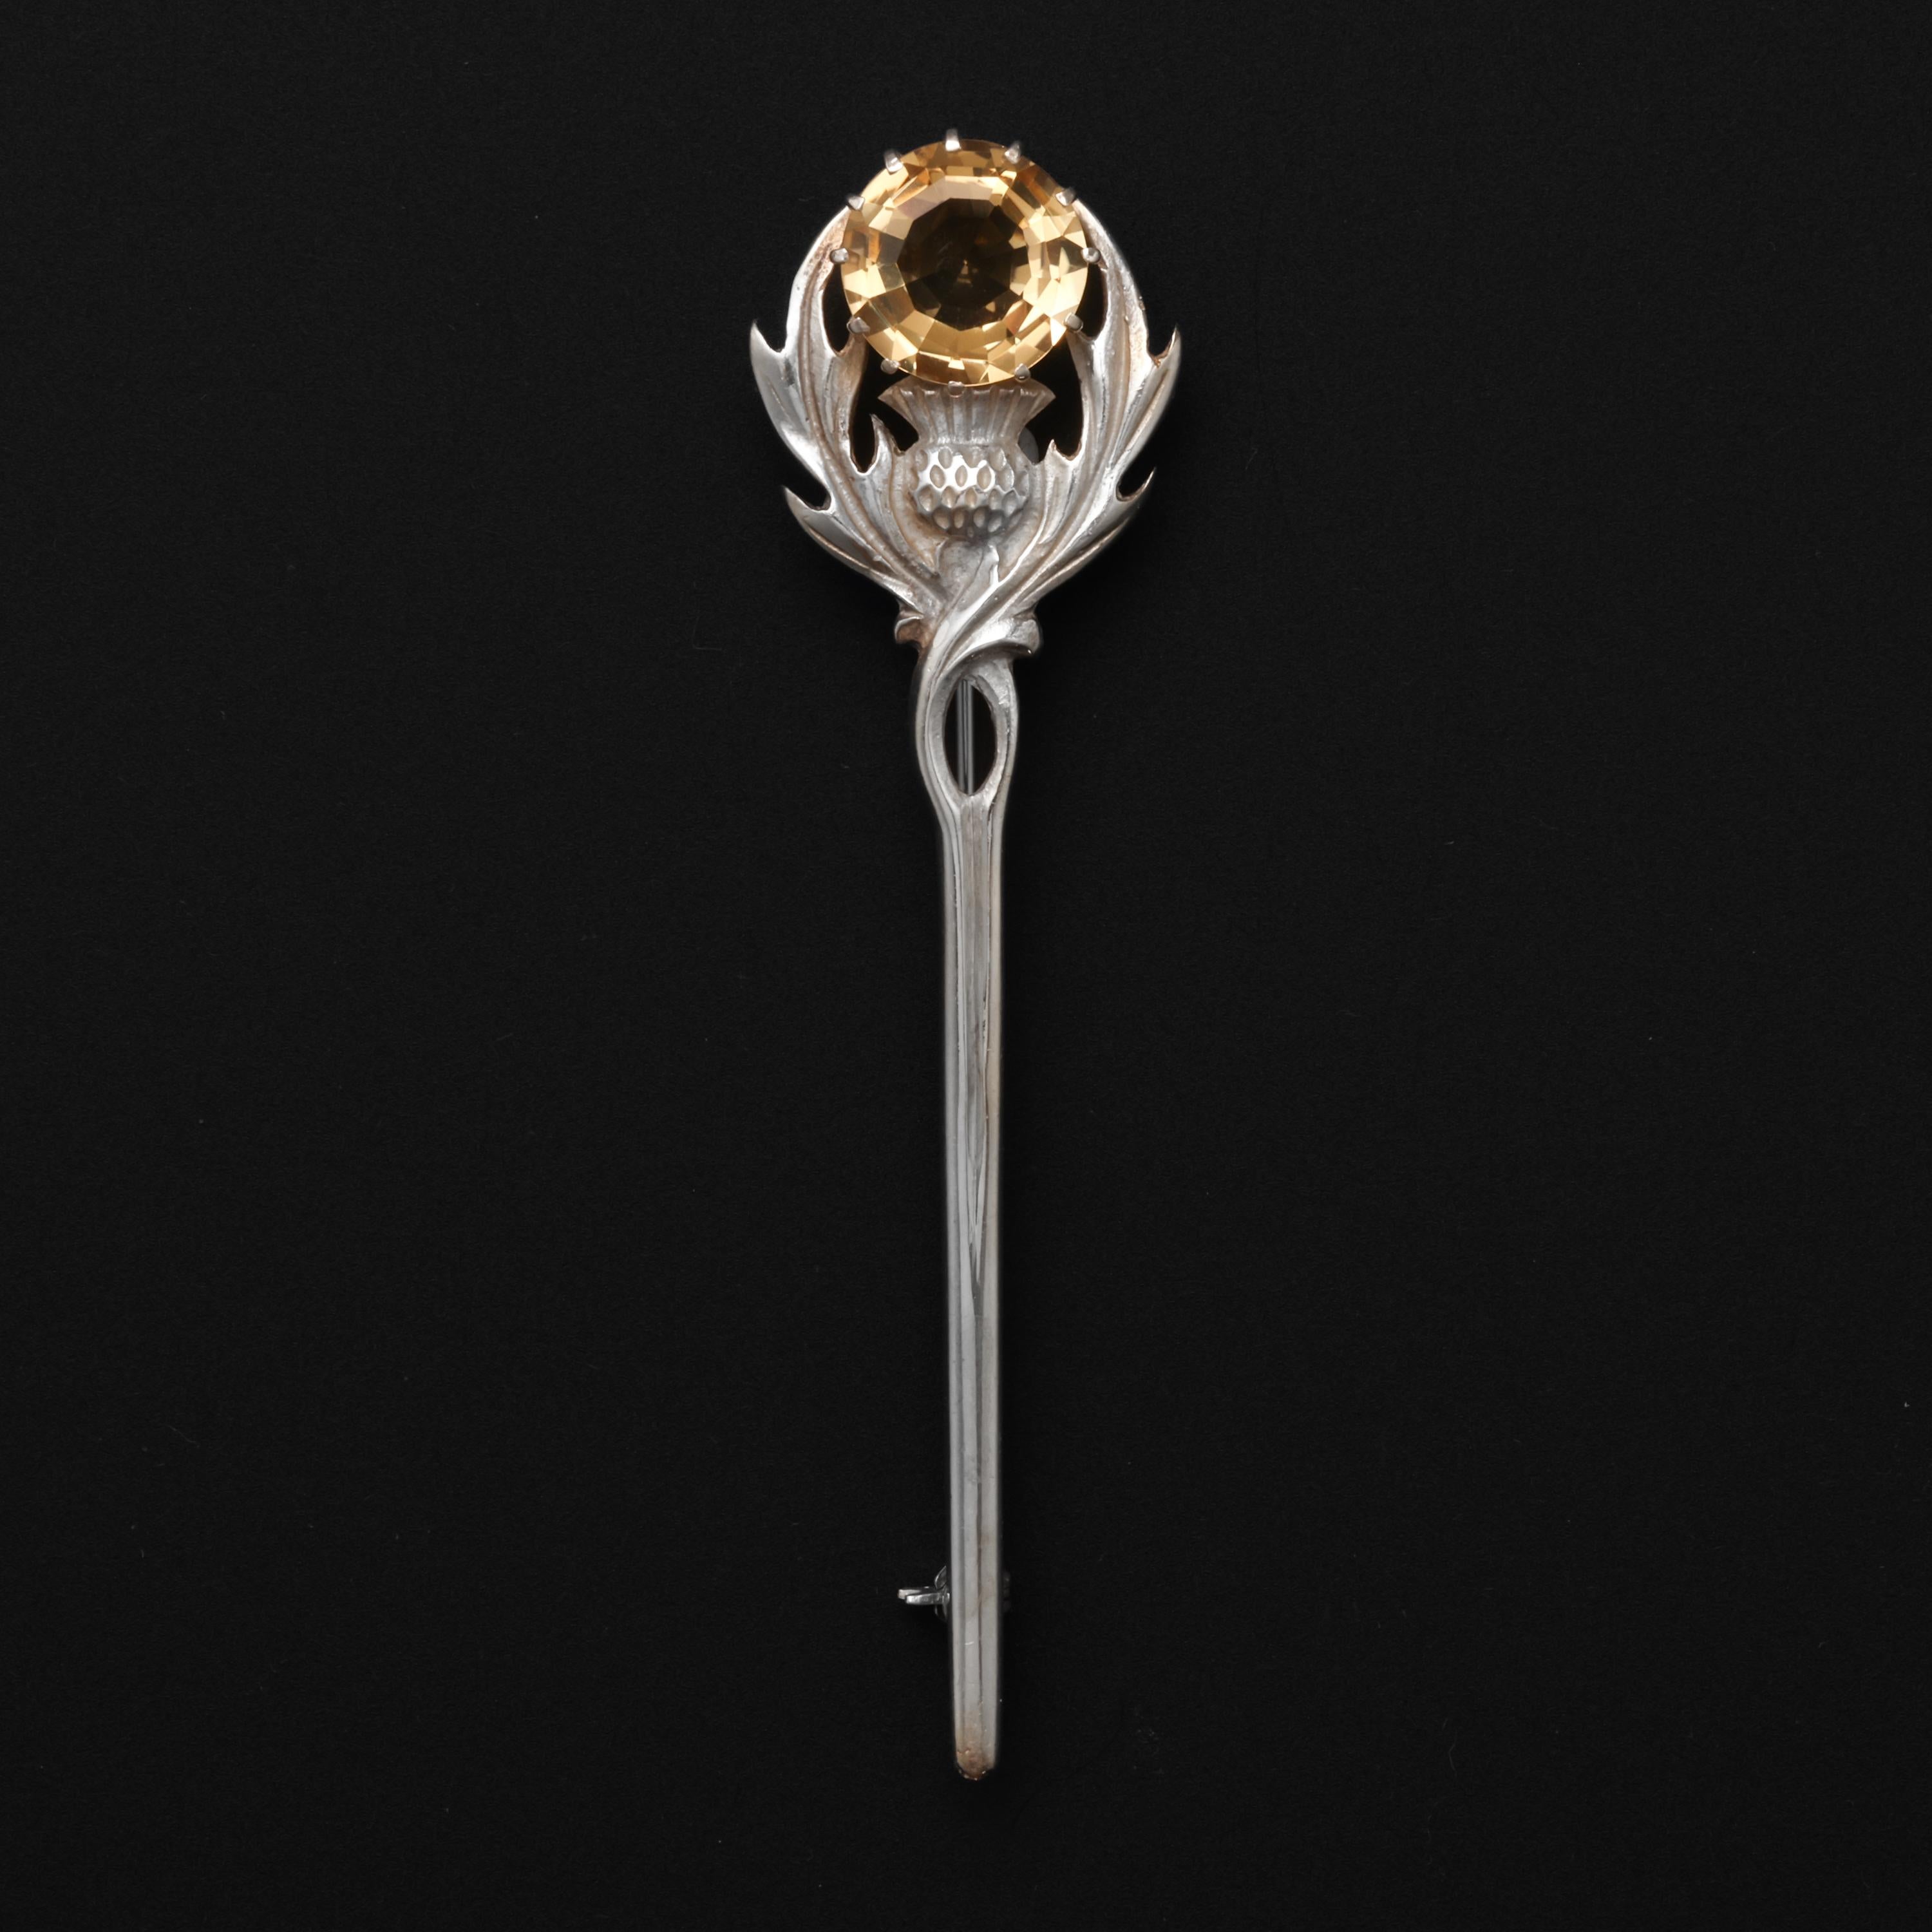 This midcentury (circa 1970) Scottish brooch features a thistle motif with two shaggy leaves holding up a large (12mm) faceted round citrine gemstone. Citrine is found in limited amounts in the Cairngorm Mountains in Scotland. Thus, Cairngorm